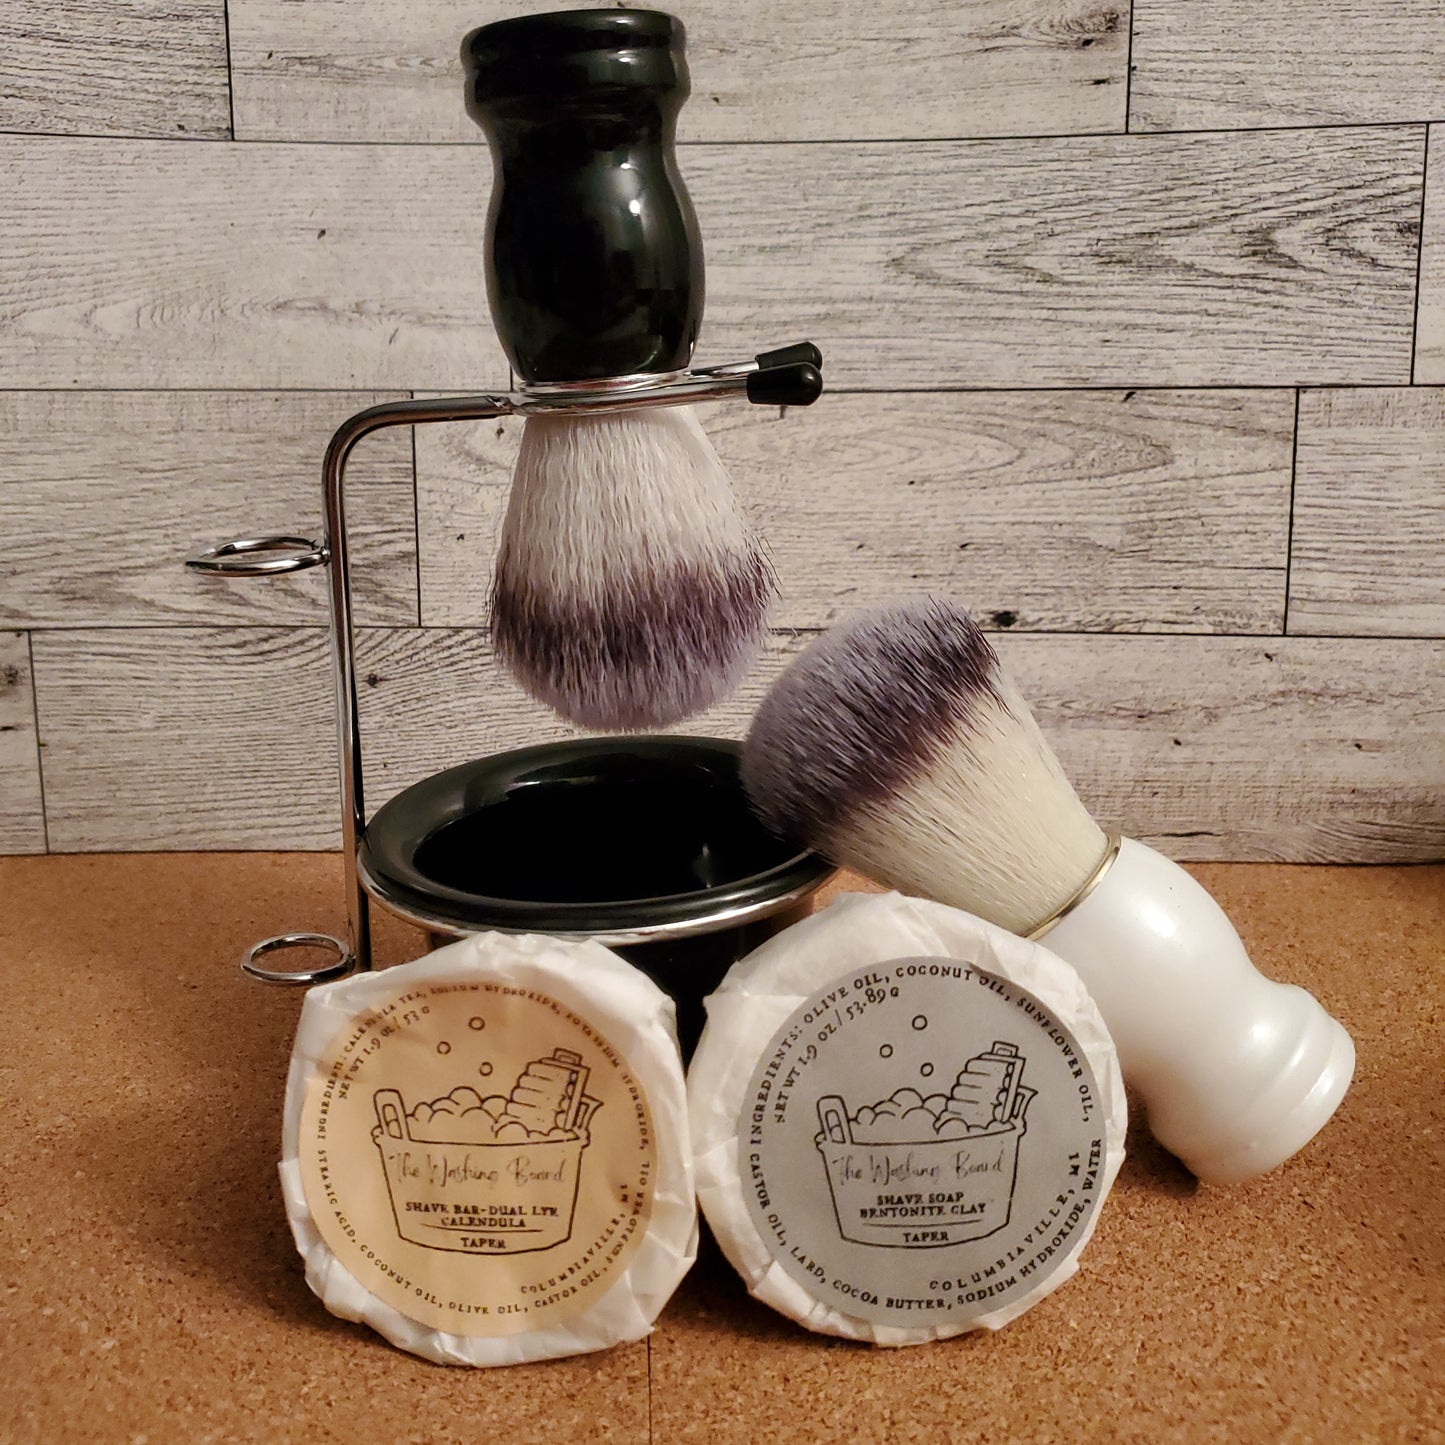 Shake Kit, stand with bowl shown with Shave Brush and Shave Soap options. 